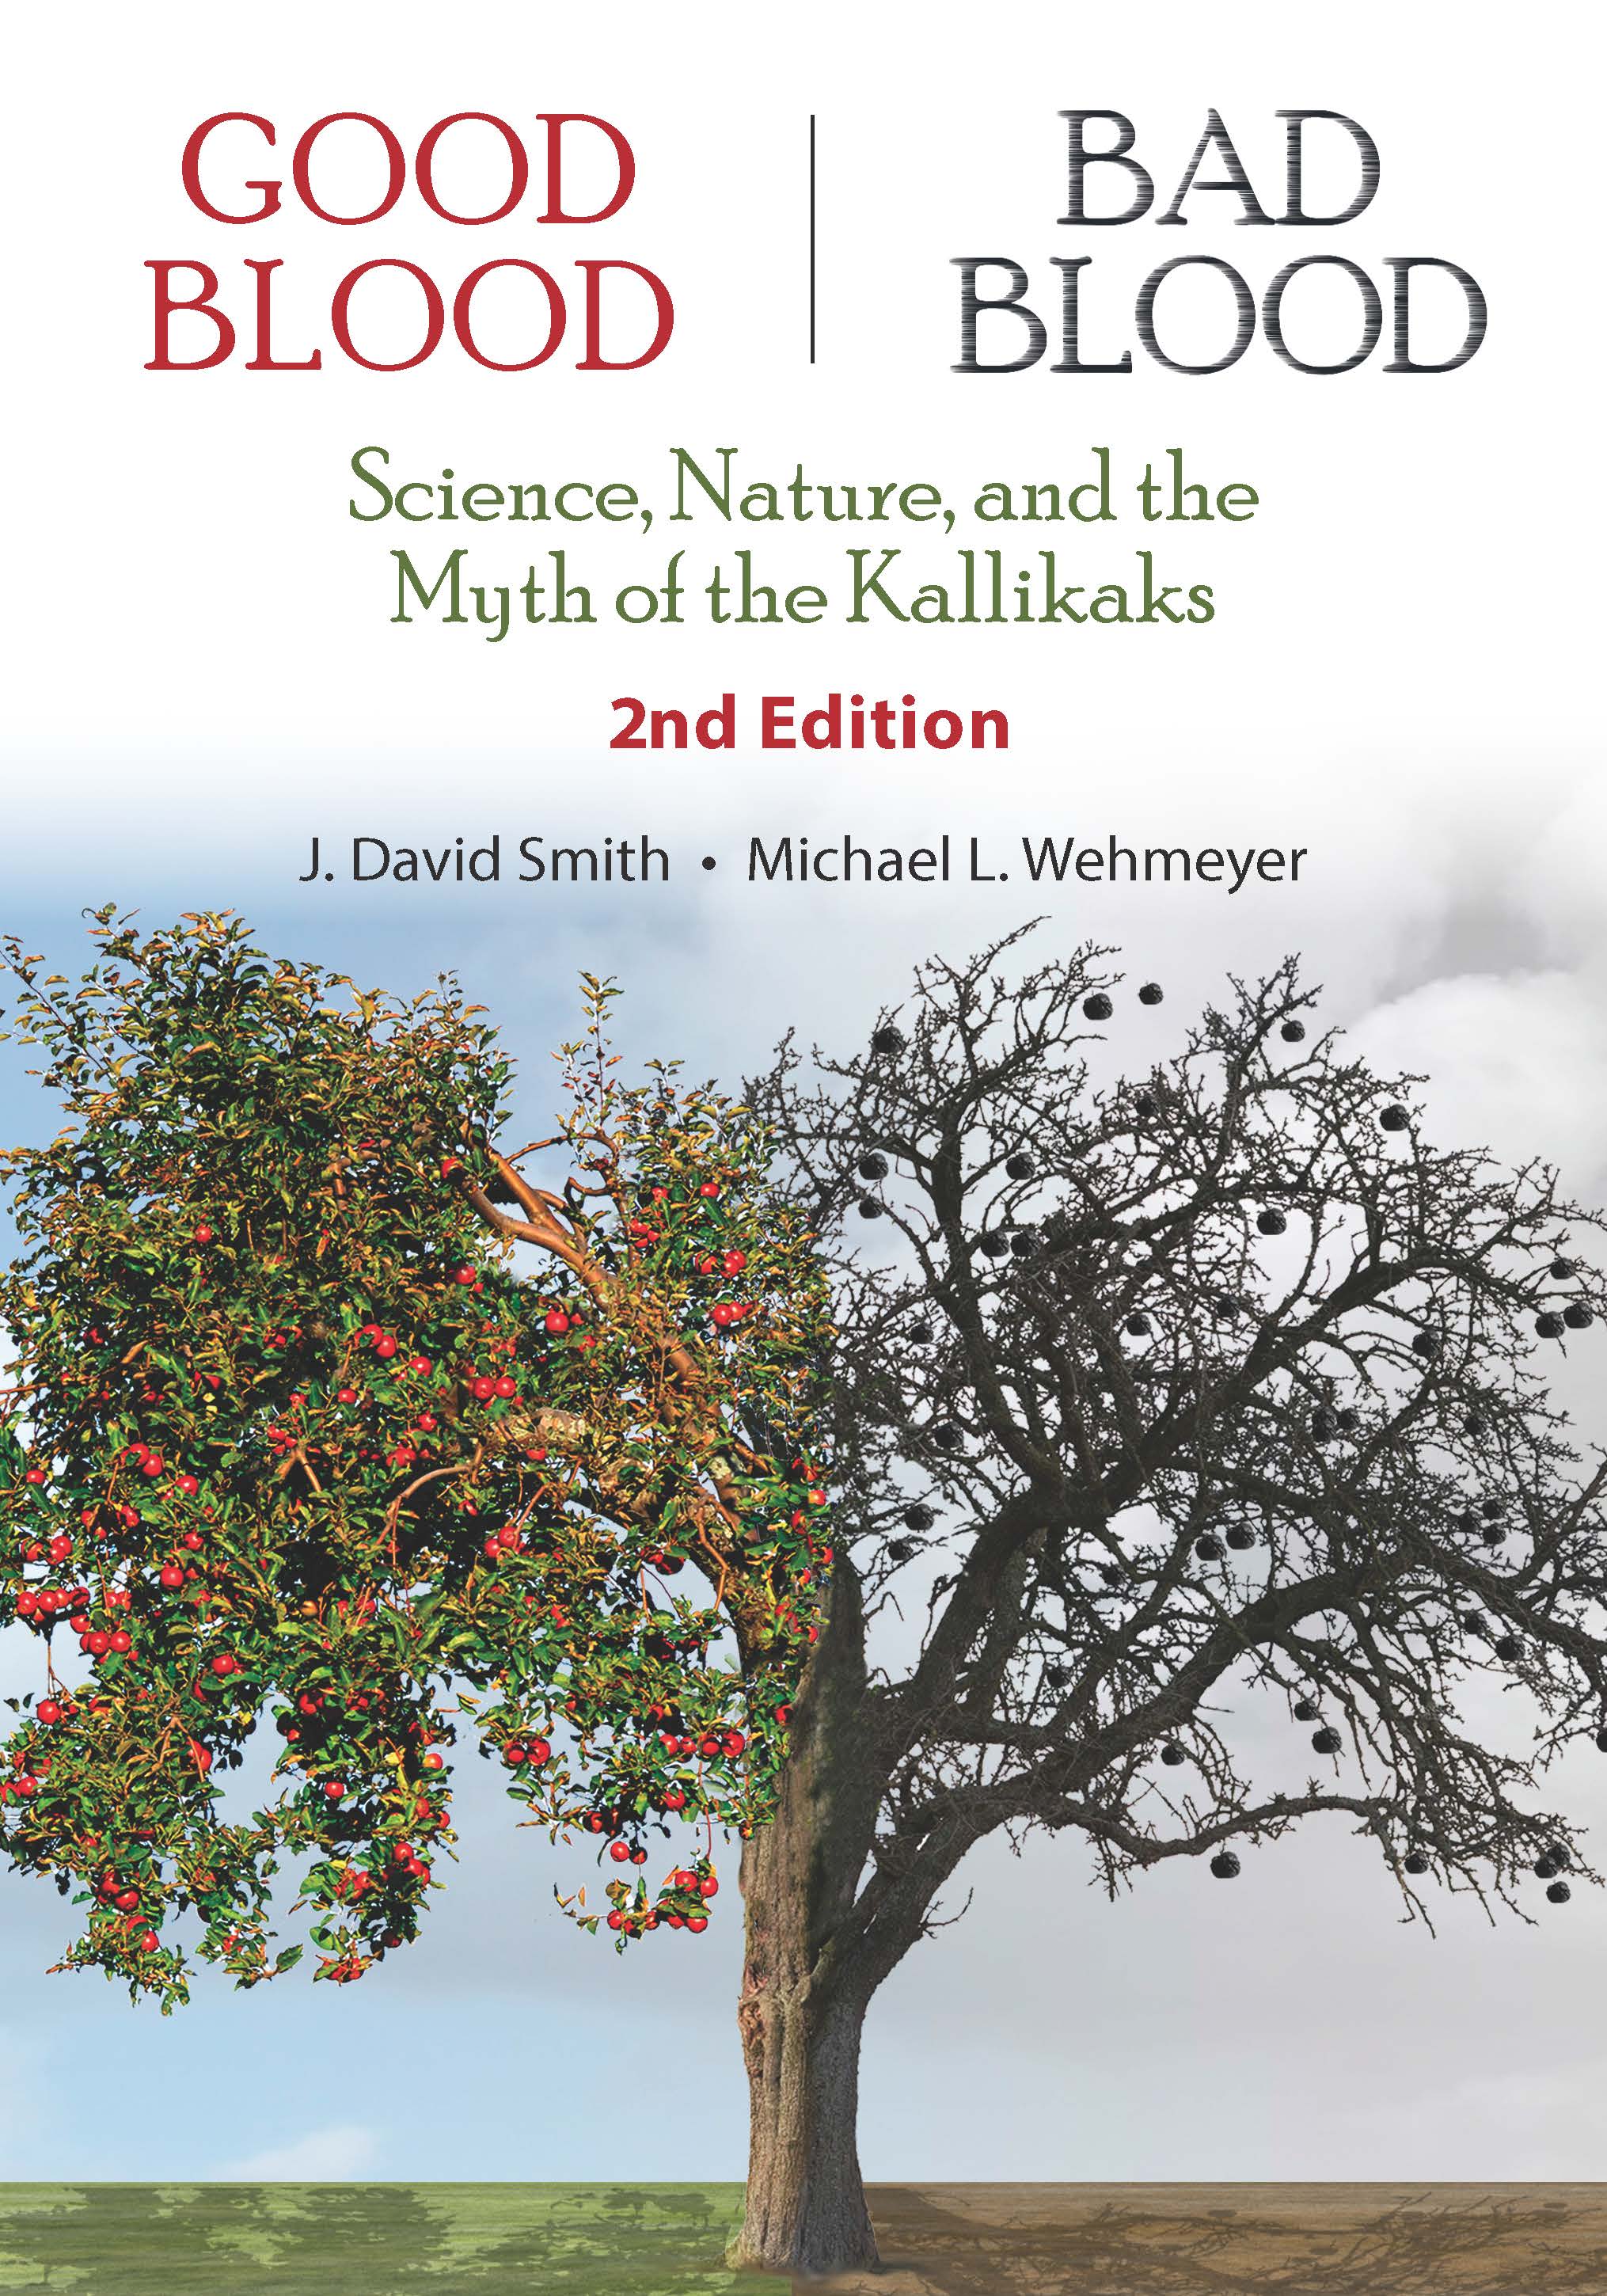 Good Blood, Bad Blood: Science, Nature, and the Myth of the Kallikaks, 2nd  Edition